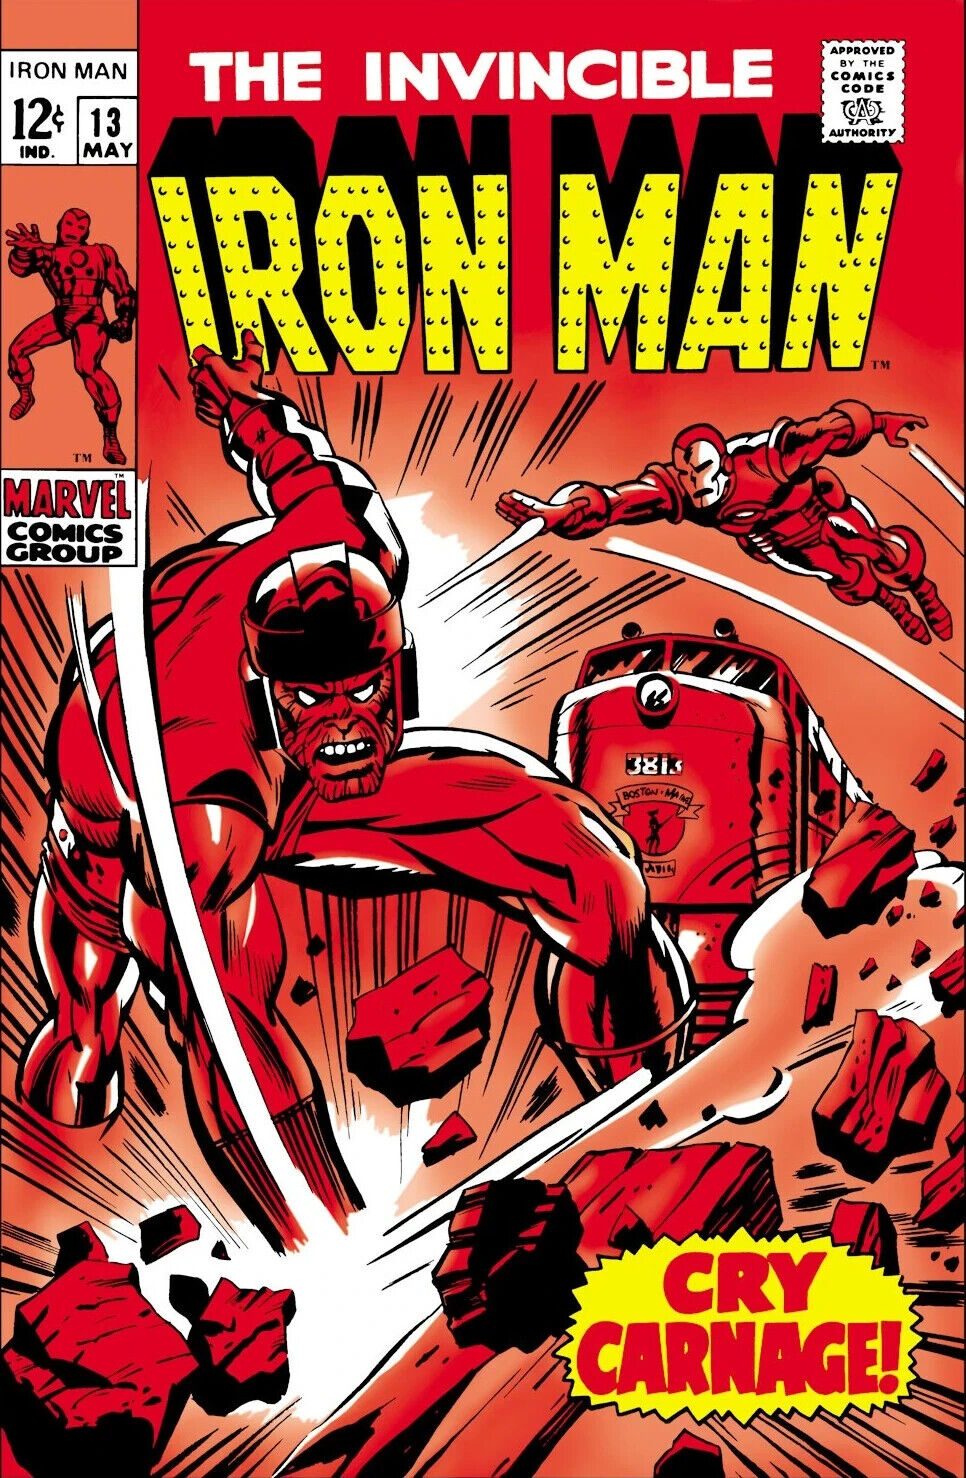 IRON MAN #13 - 1969 Marvel comic book with THE CONTROLLER, SHIELD, NICK FURY,